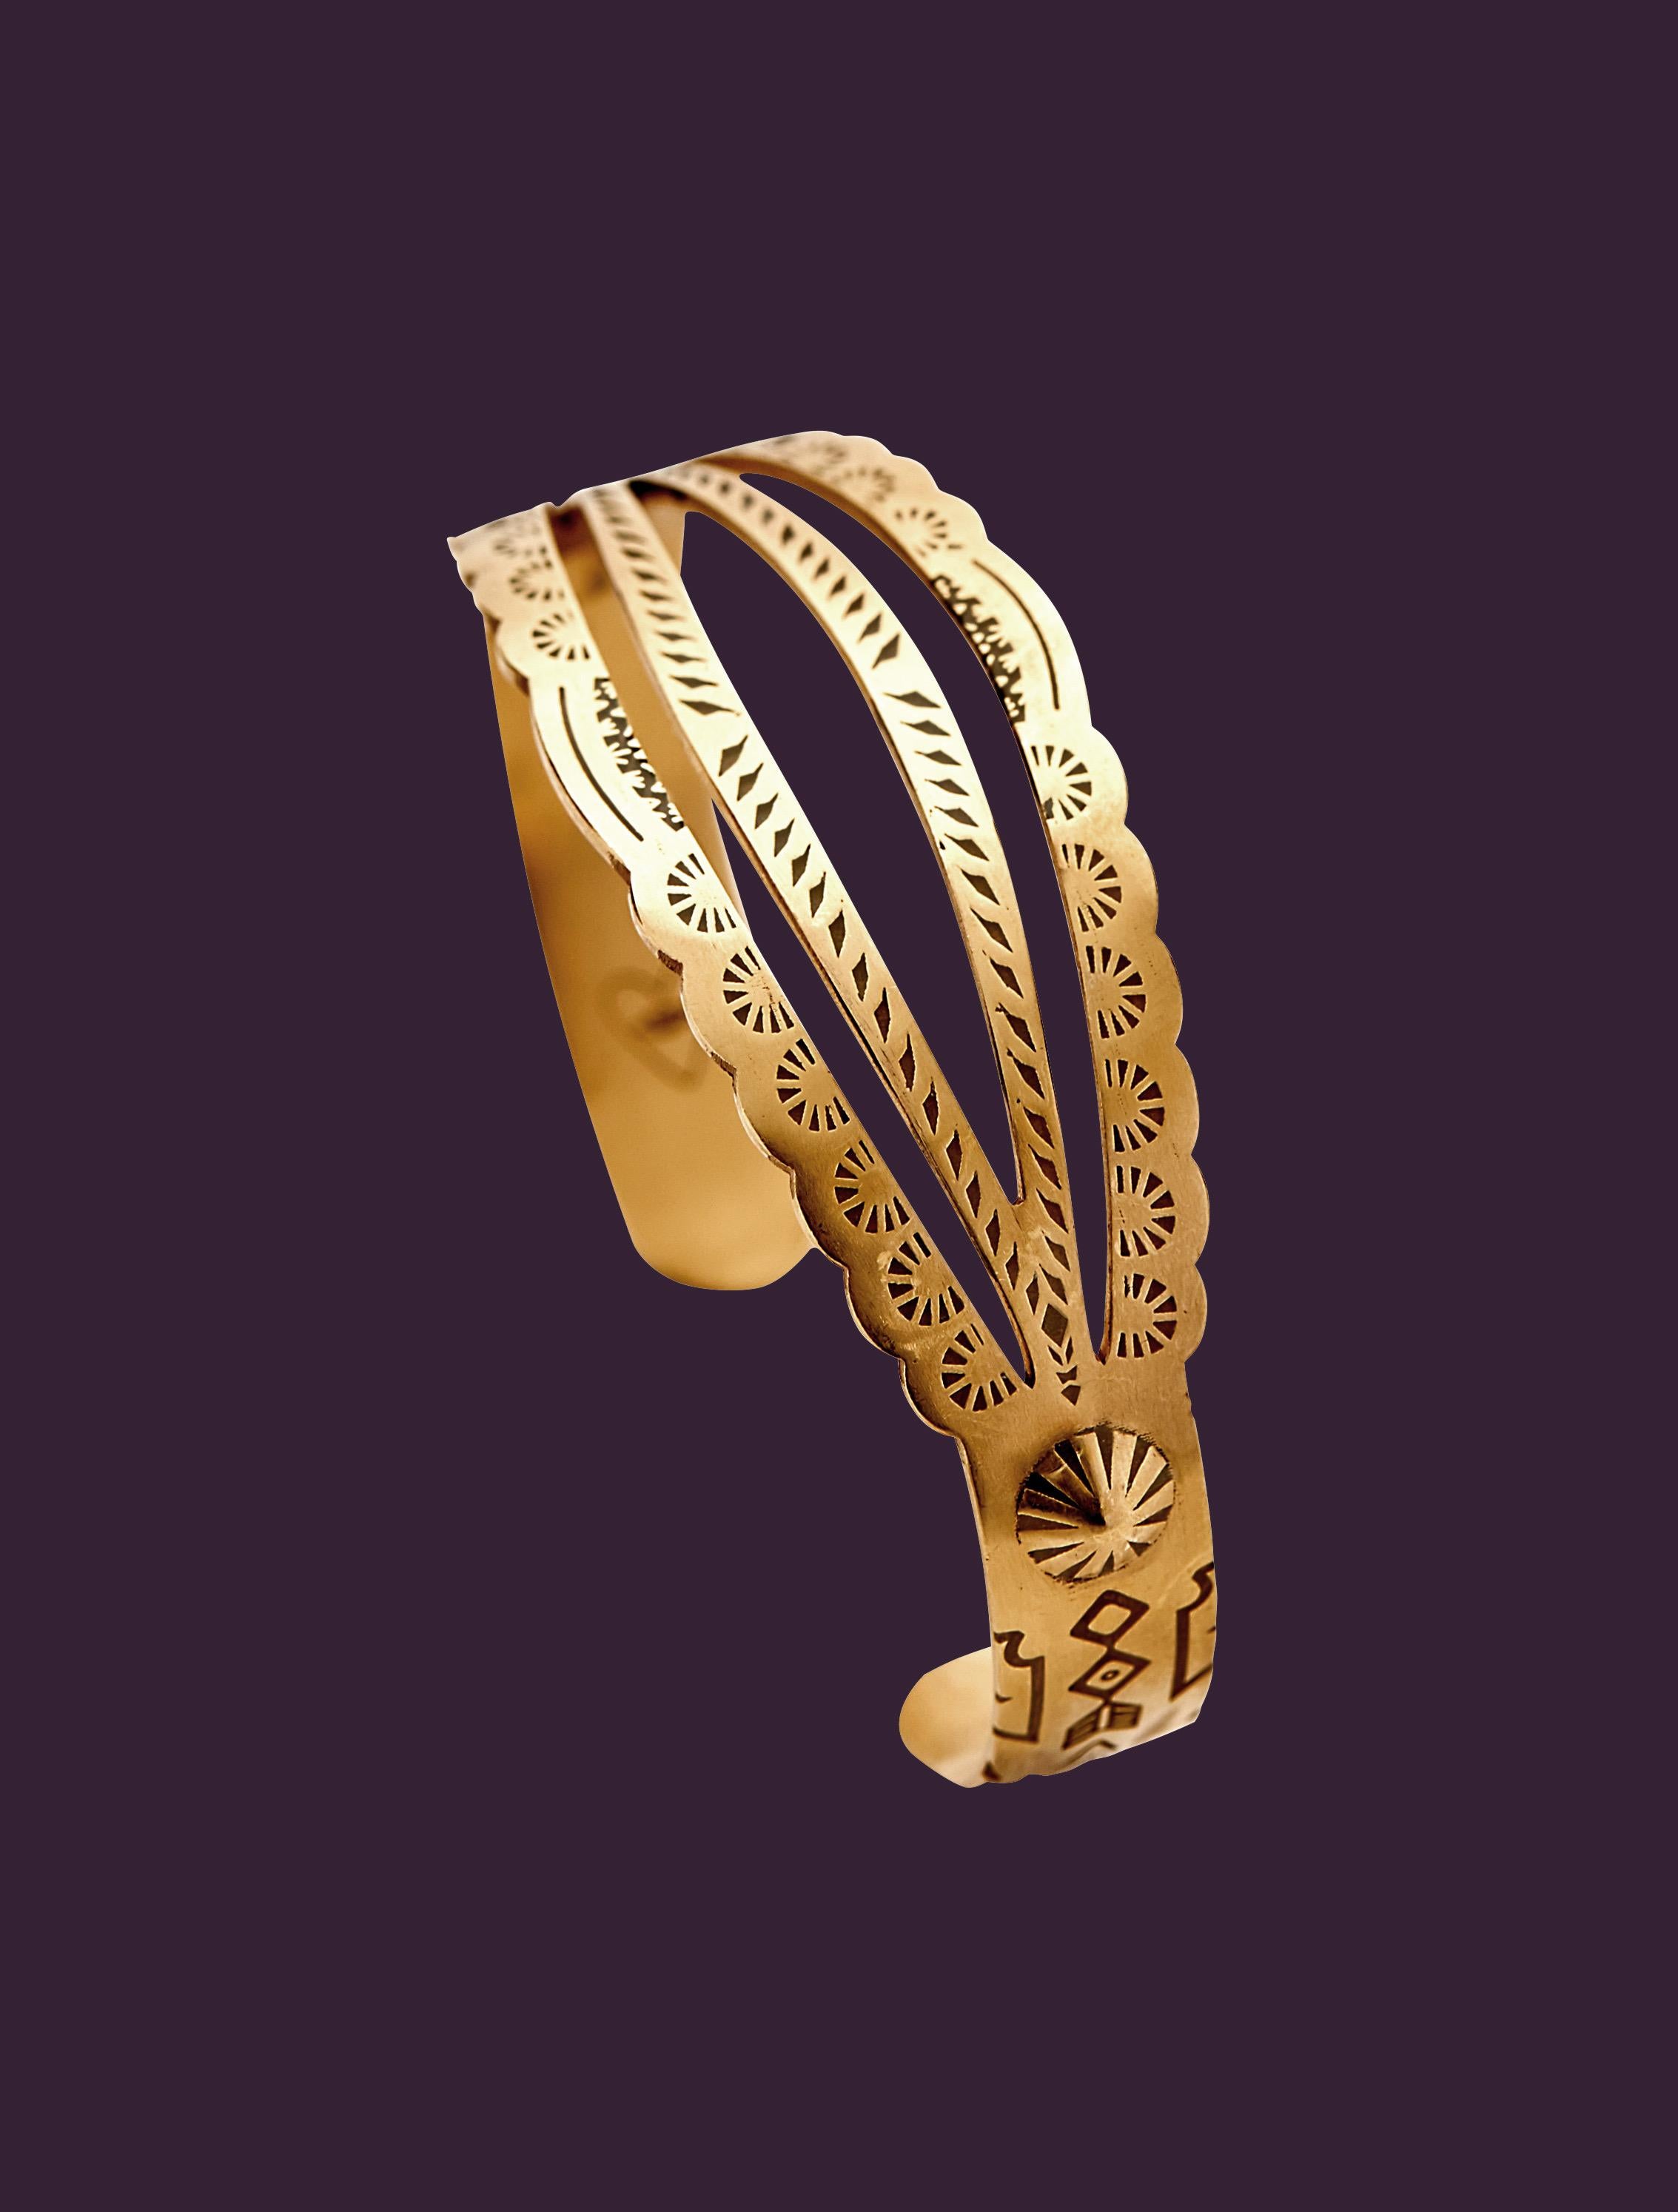 The cuff bracelet is designed by Christina Alexiou.
This cuff bracelet is crafted with 18k yellow gold. As designer Christina Alexiou notes, she draws on jewellery’s ancient purpose as “a symbol of culture and tribe.”The design of this bracelet 